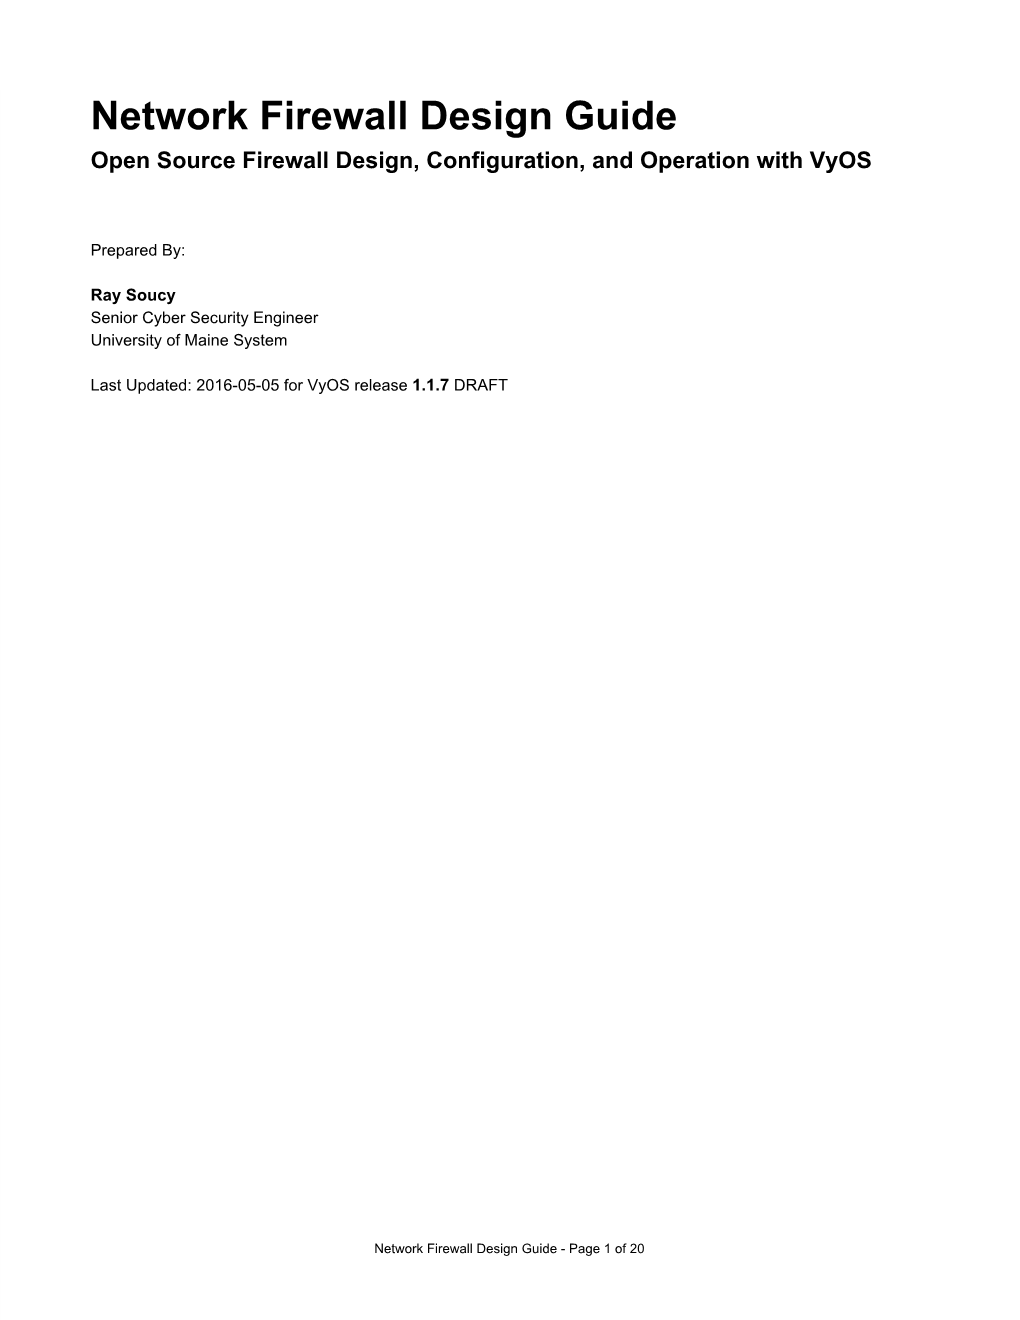 Network Firewall Design Guide Open Source Firewall Design, Configuration, and Operation with Vyos